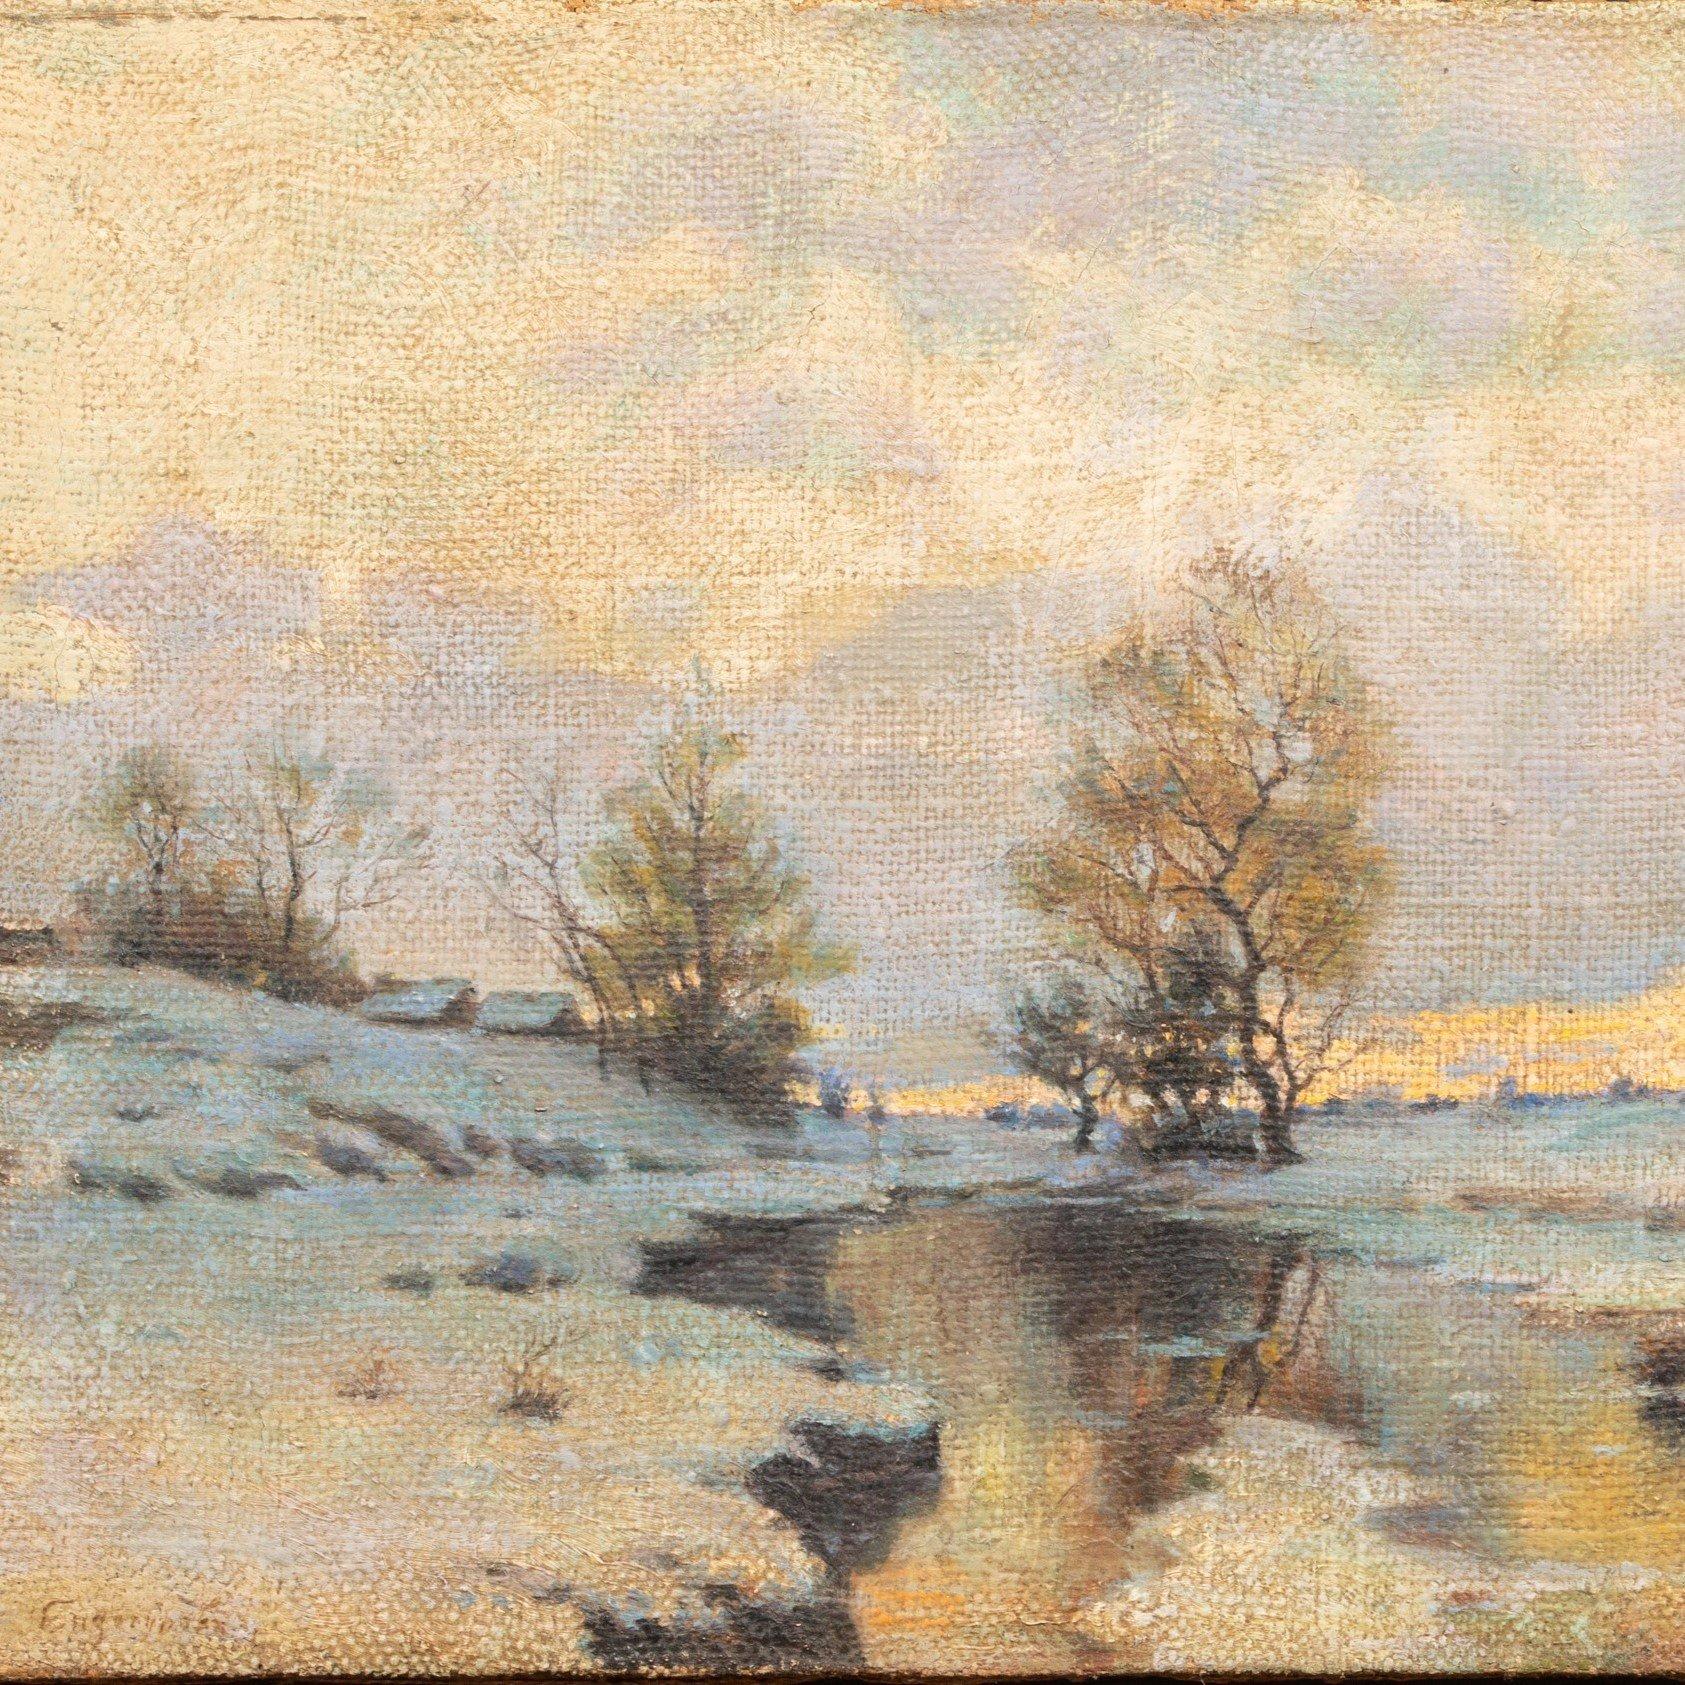 Endoguruv was one of the great artists in the history of Russian landscape painting, and the depiction of still waters was an important theme in his works.
Ivan Endogurov depicted not only Russian nature, but also Western and European nature,